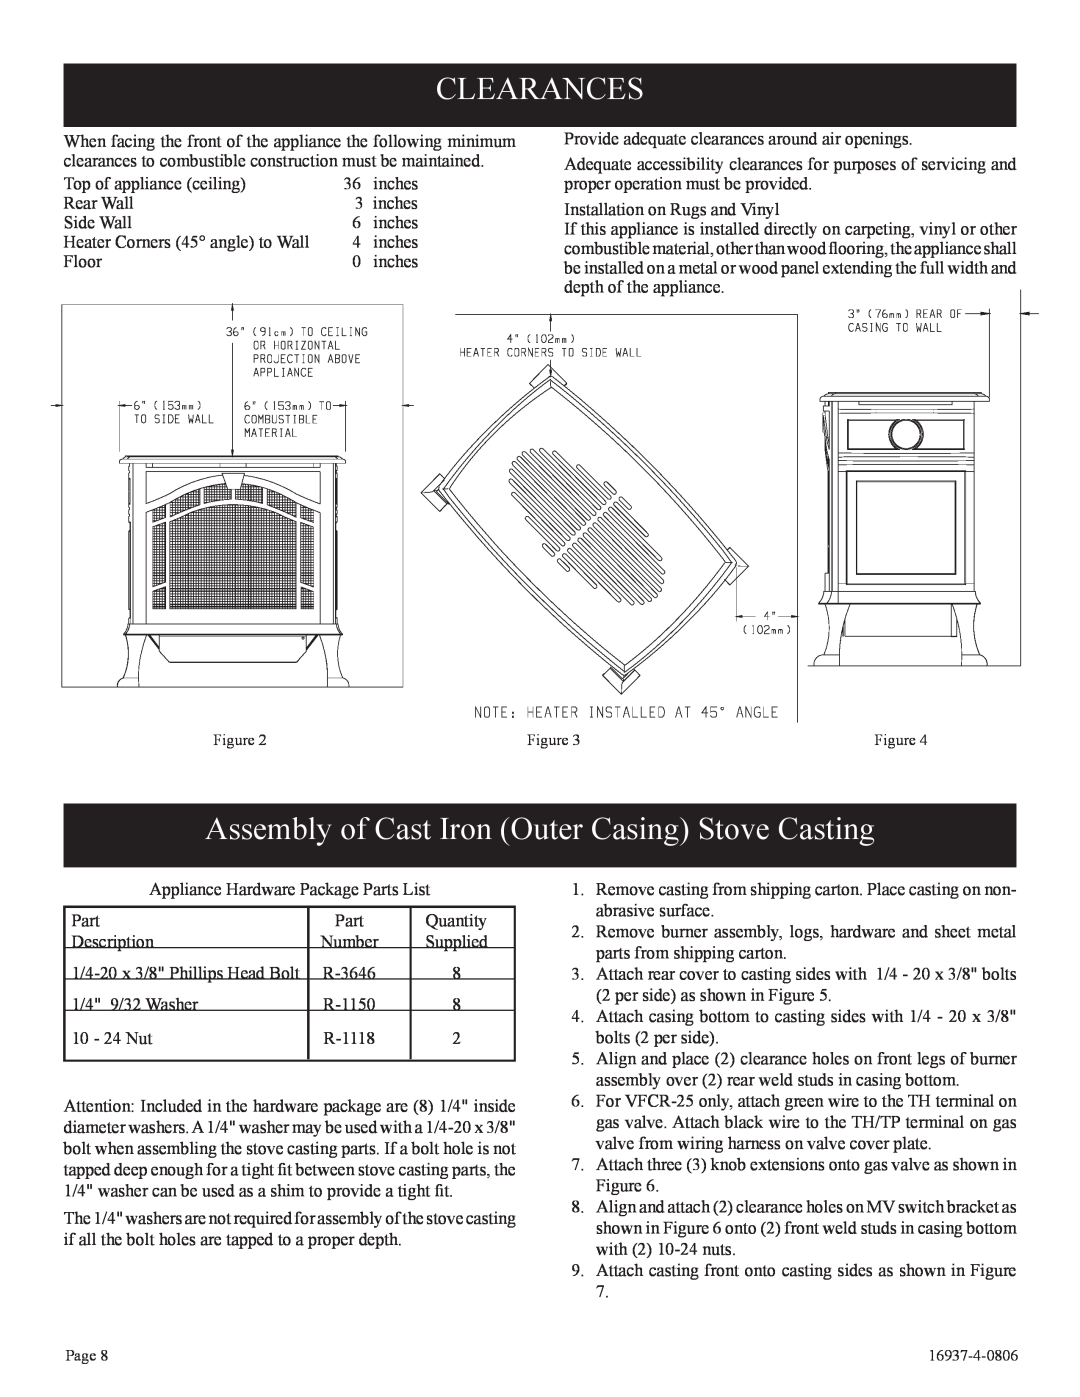 Empire Comfort Systems VFCT25-3, VFCM-25-3. VFCR-25-3 Clearances, Assembly of Cast Iron Outer Casing Stove Casting 